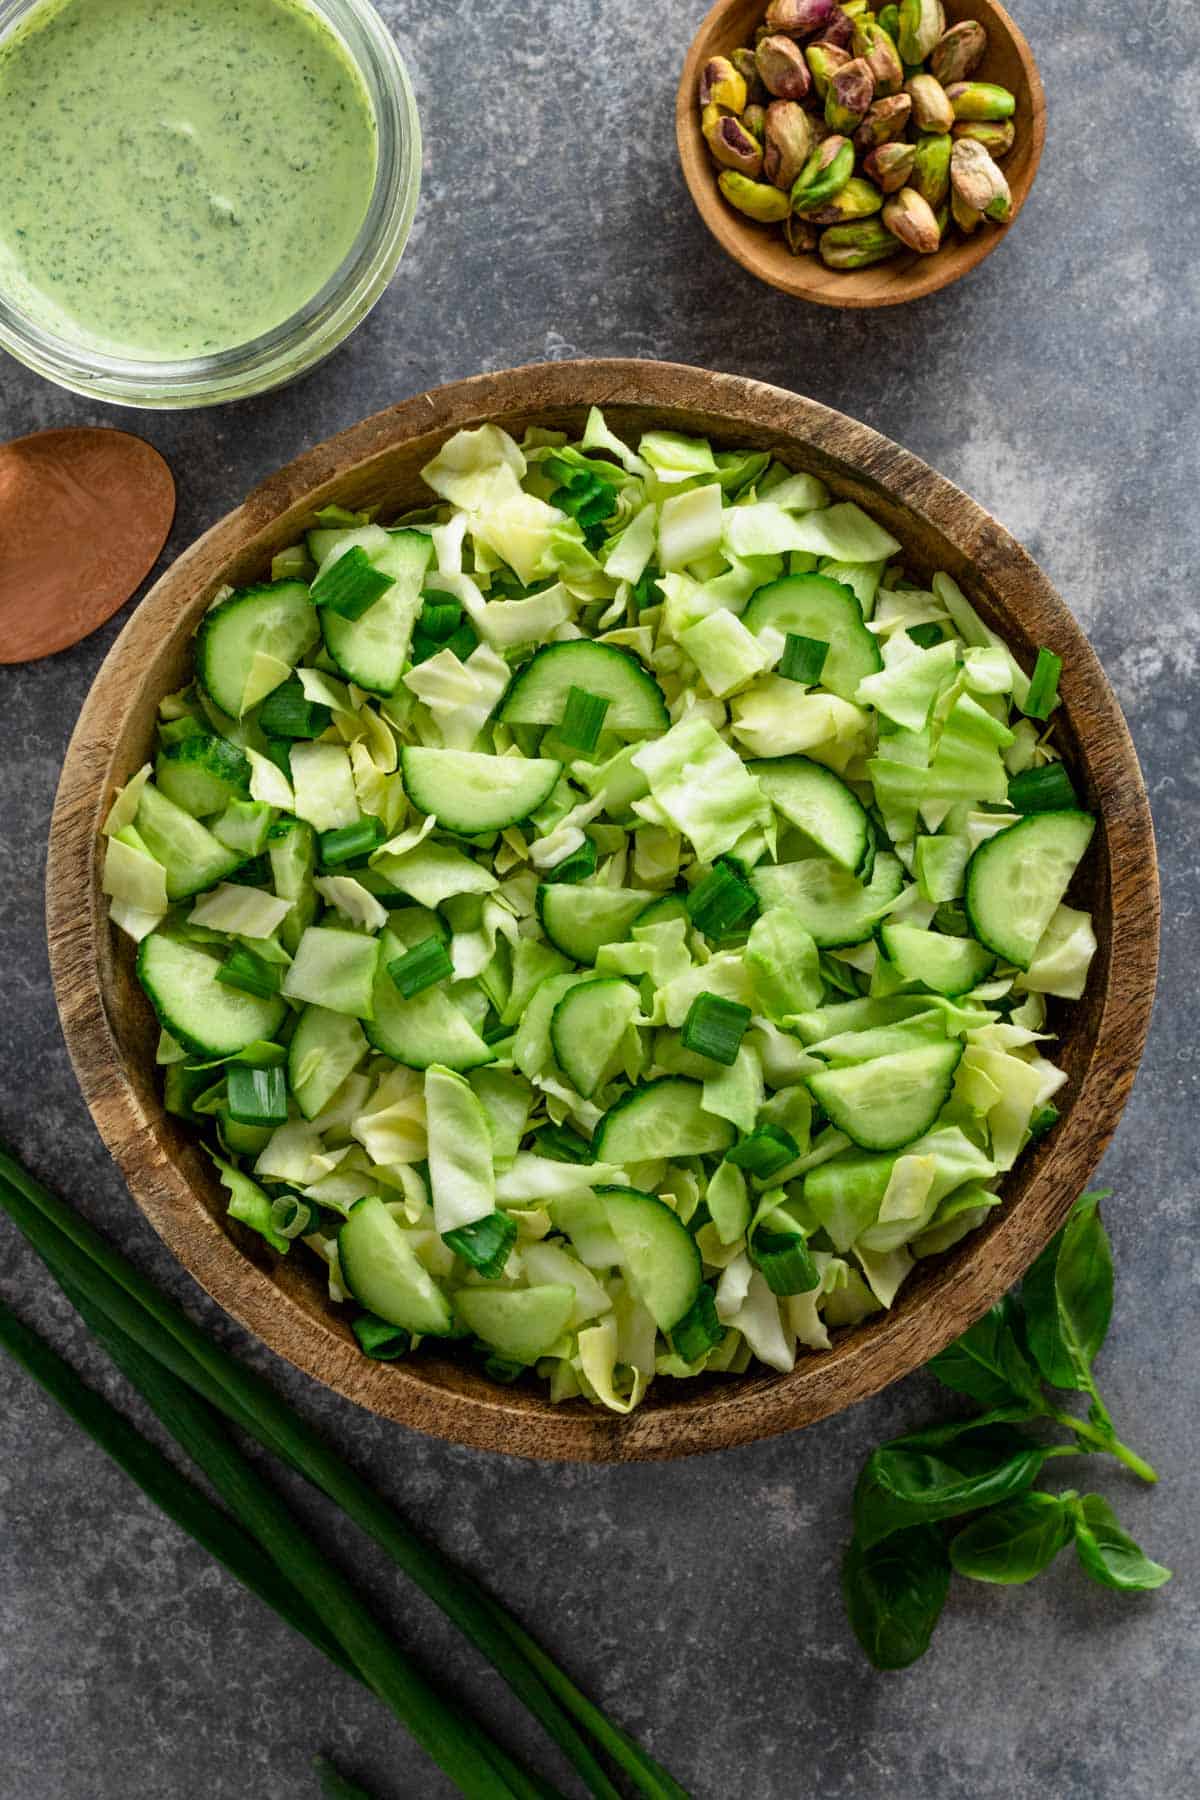 a healthy green salad with cucumbers, pistachios, cabbage and herbs